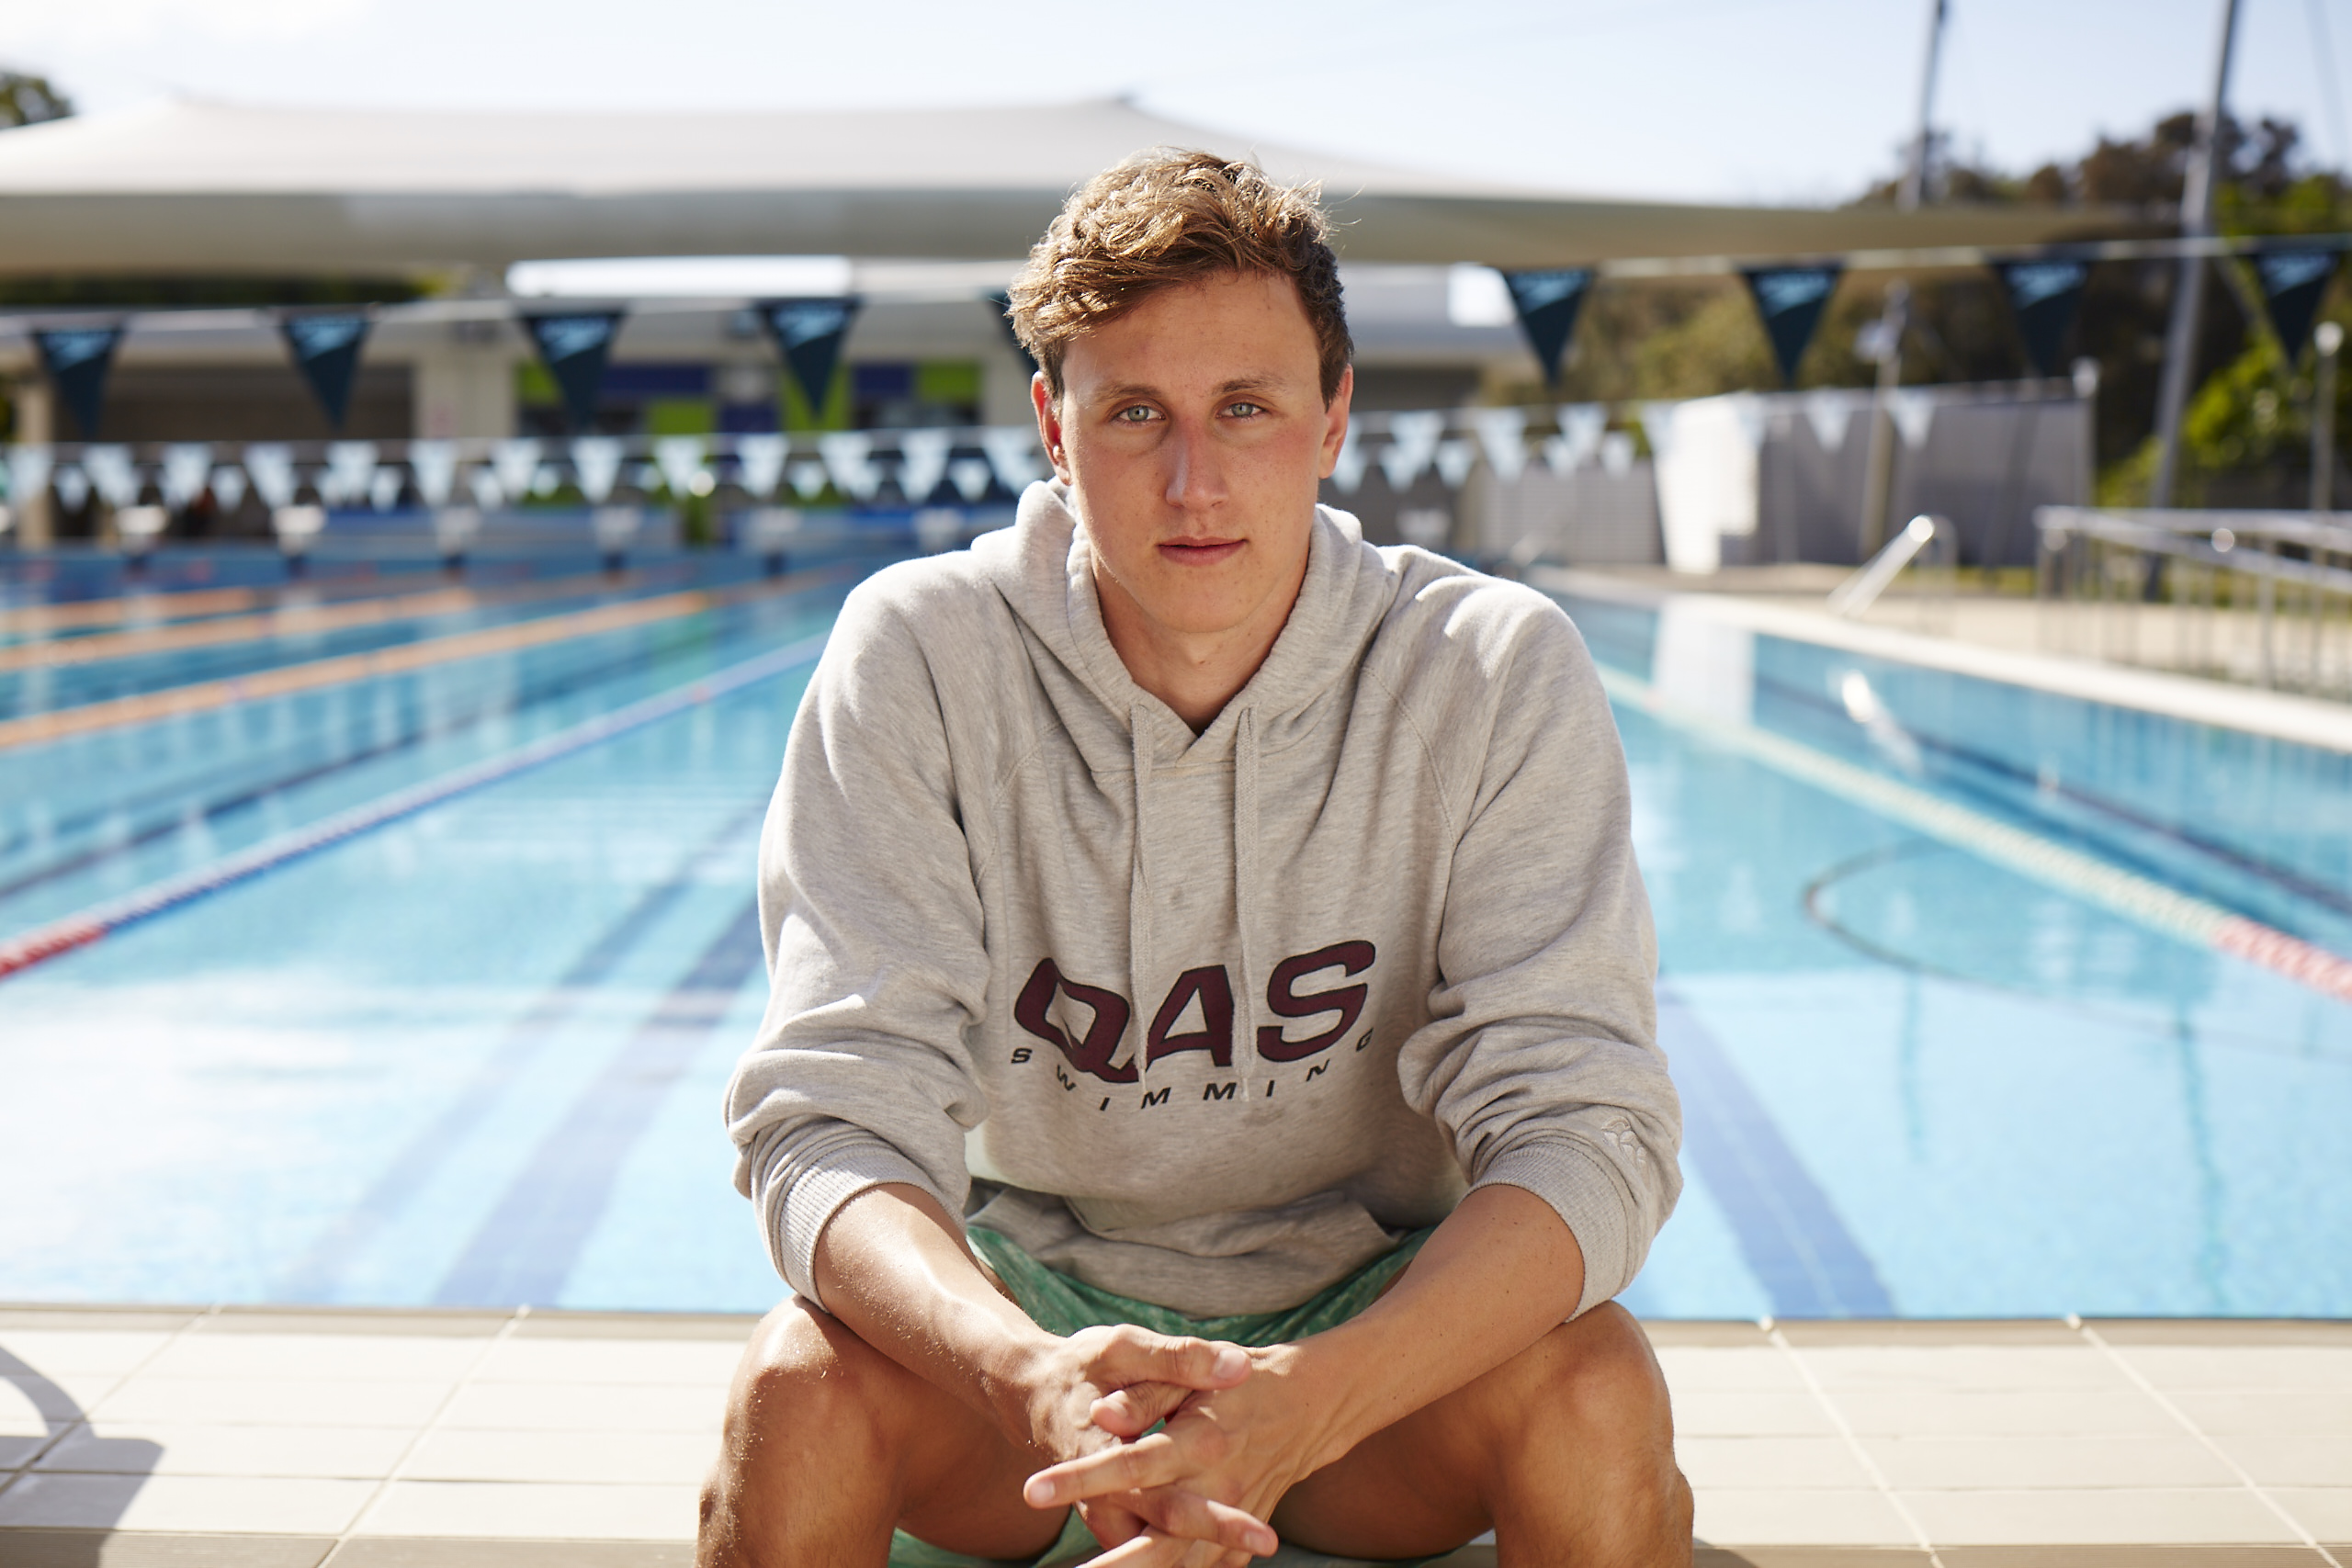 Sitting poolside, Science student and champion swimmer Cameron McEvoy is the fastest qualifier for the 100m at the 2015 world titles in Russia